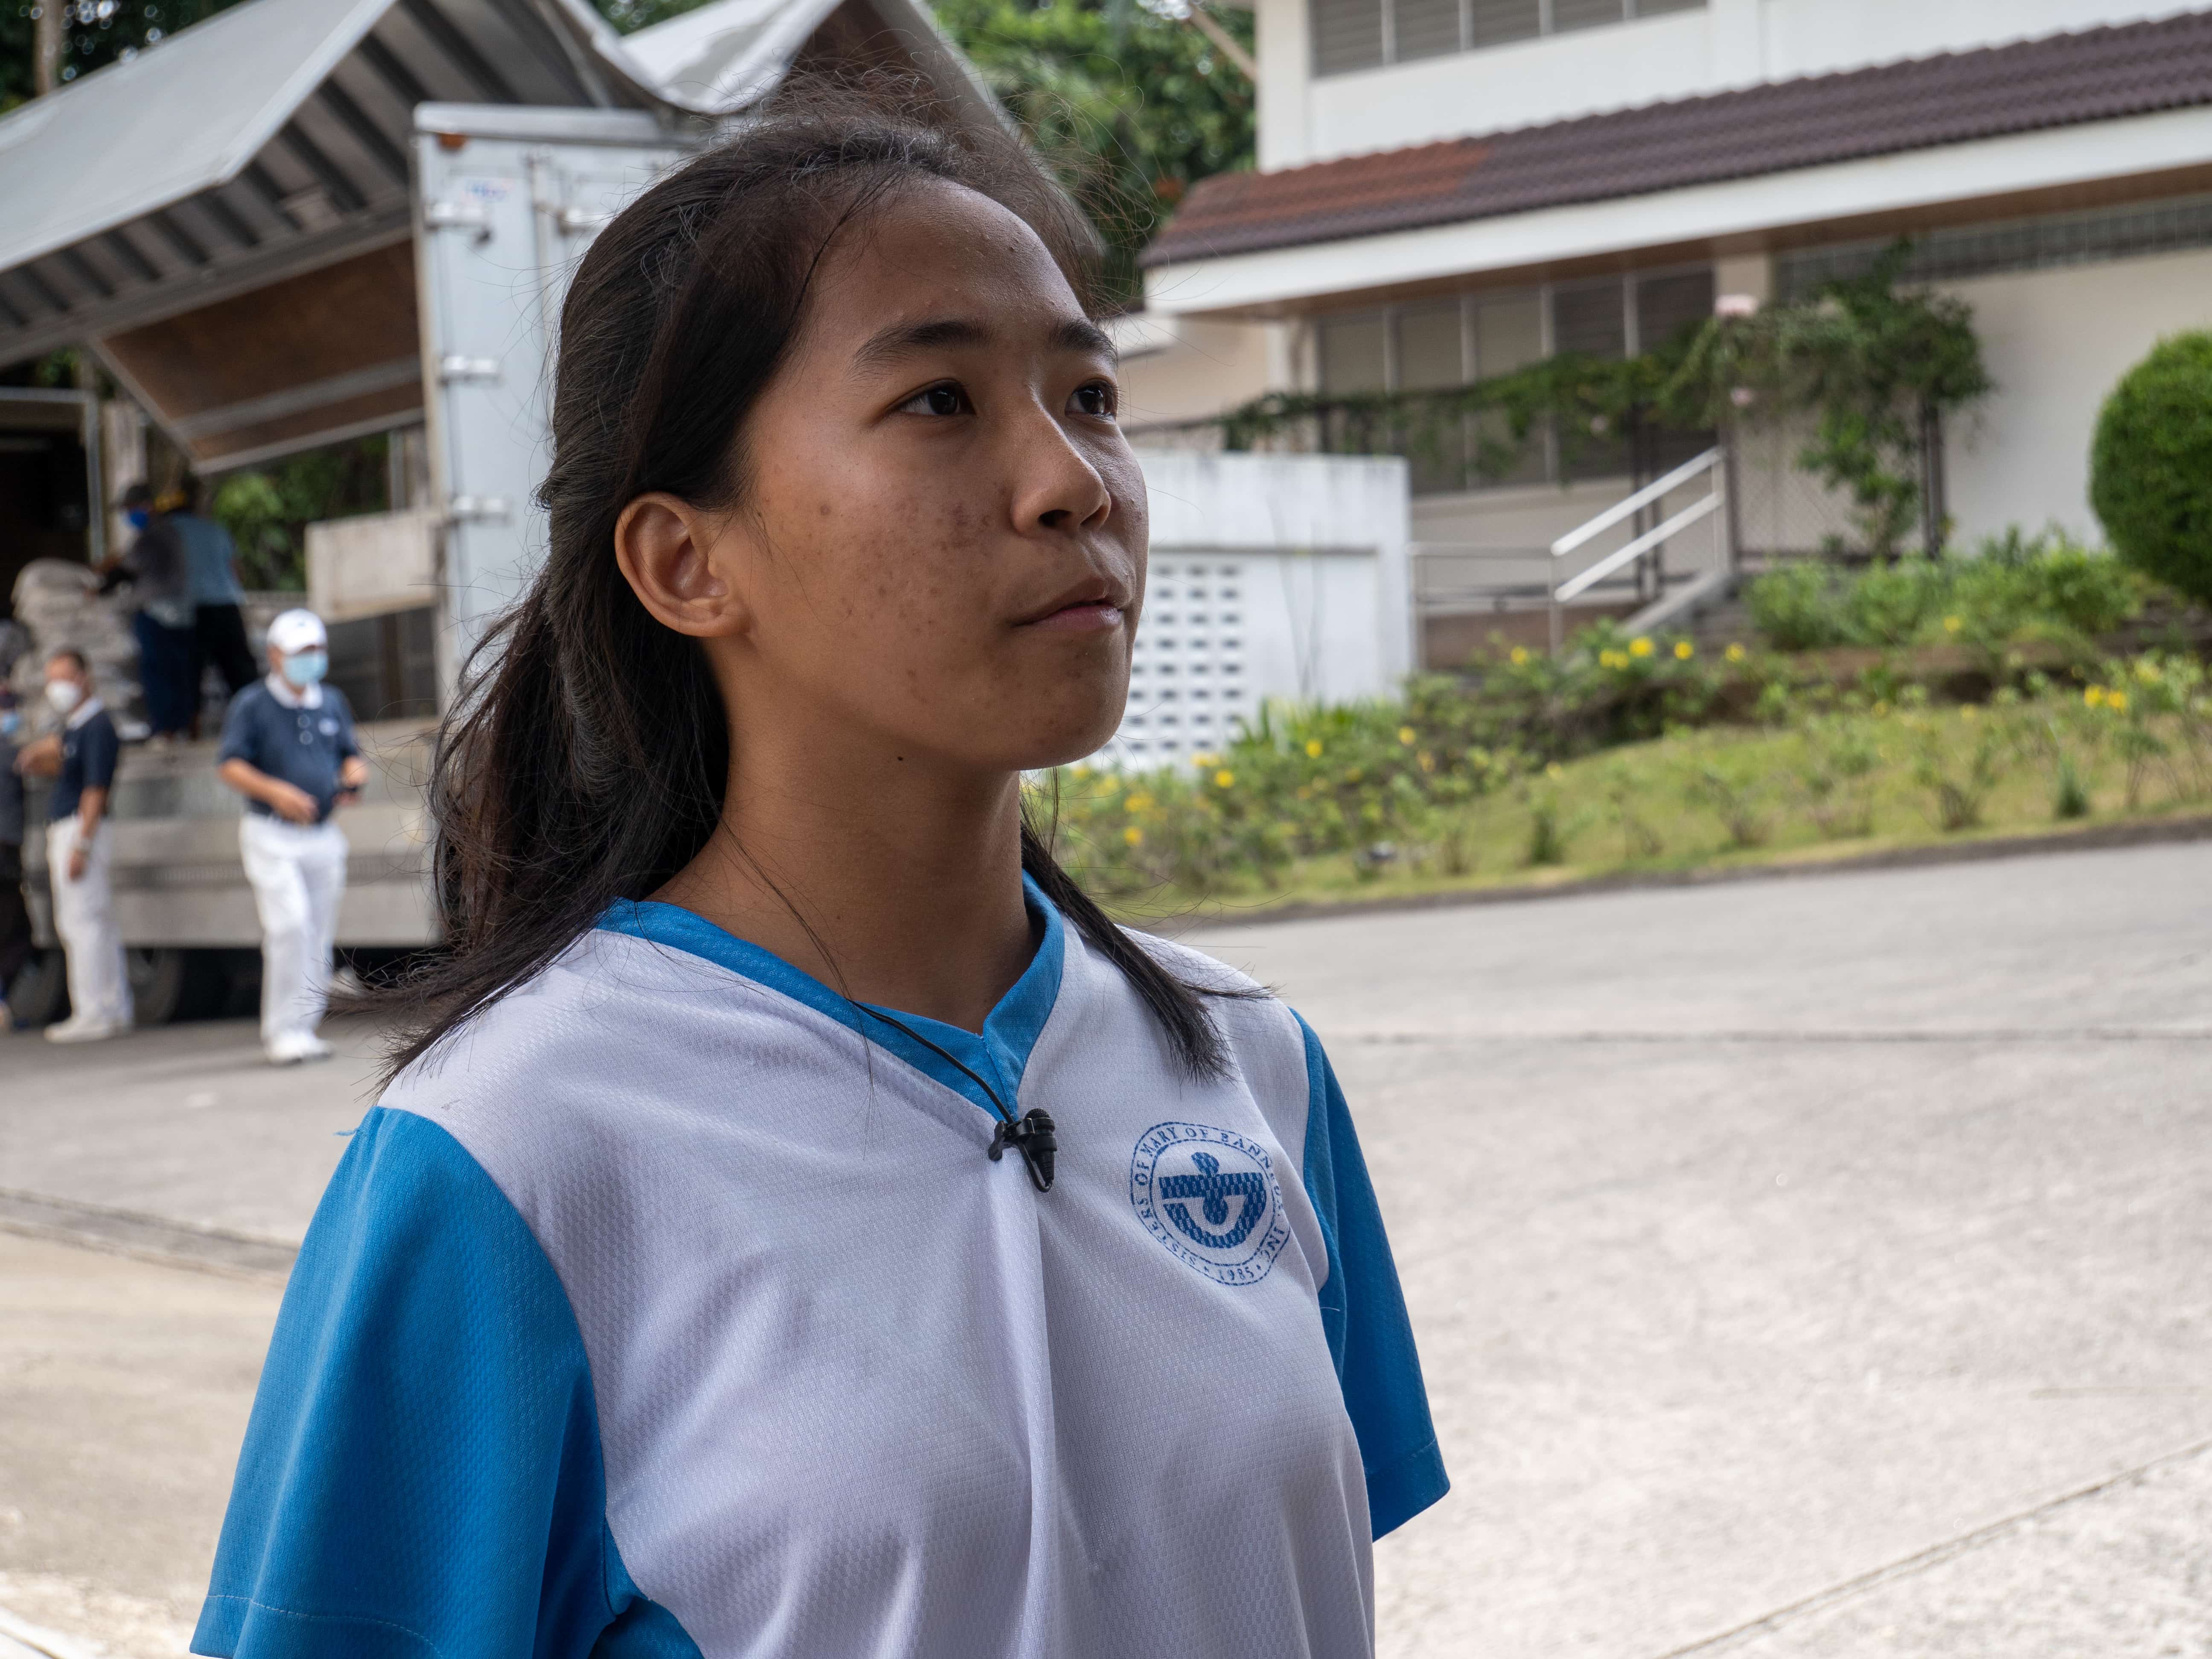 Grade 12 student Ana Maureen Zalun has been with Girlstown for the past five years. With her education and the encouragement of nuns, she dreams of being a civil engineer someday.【Photo by Matt Serrano】